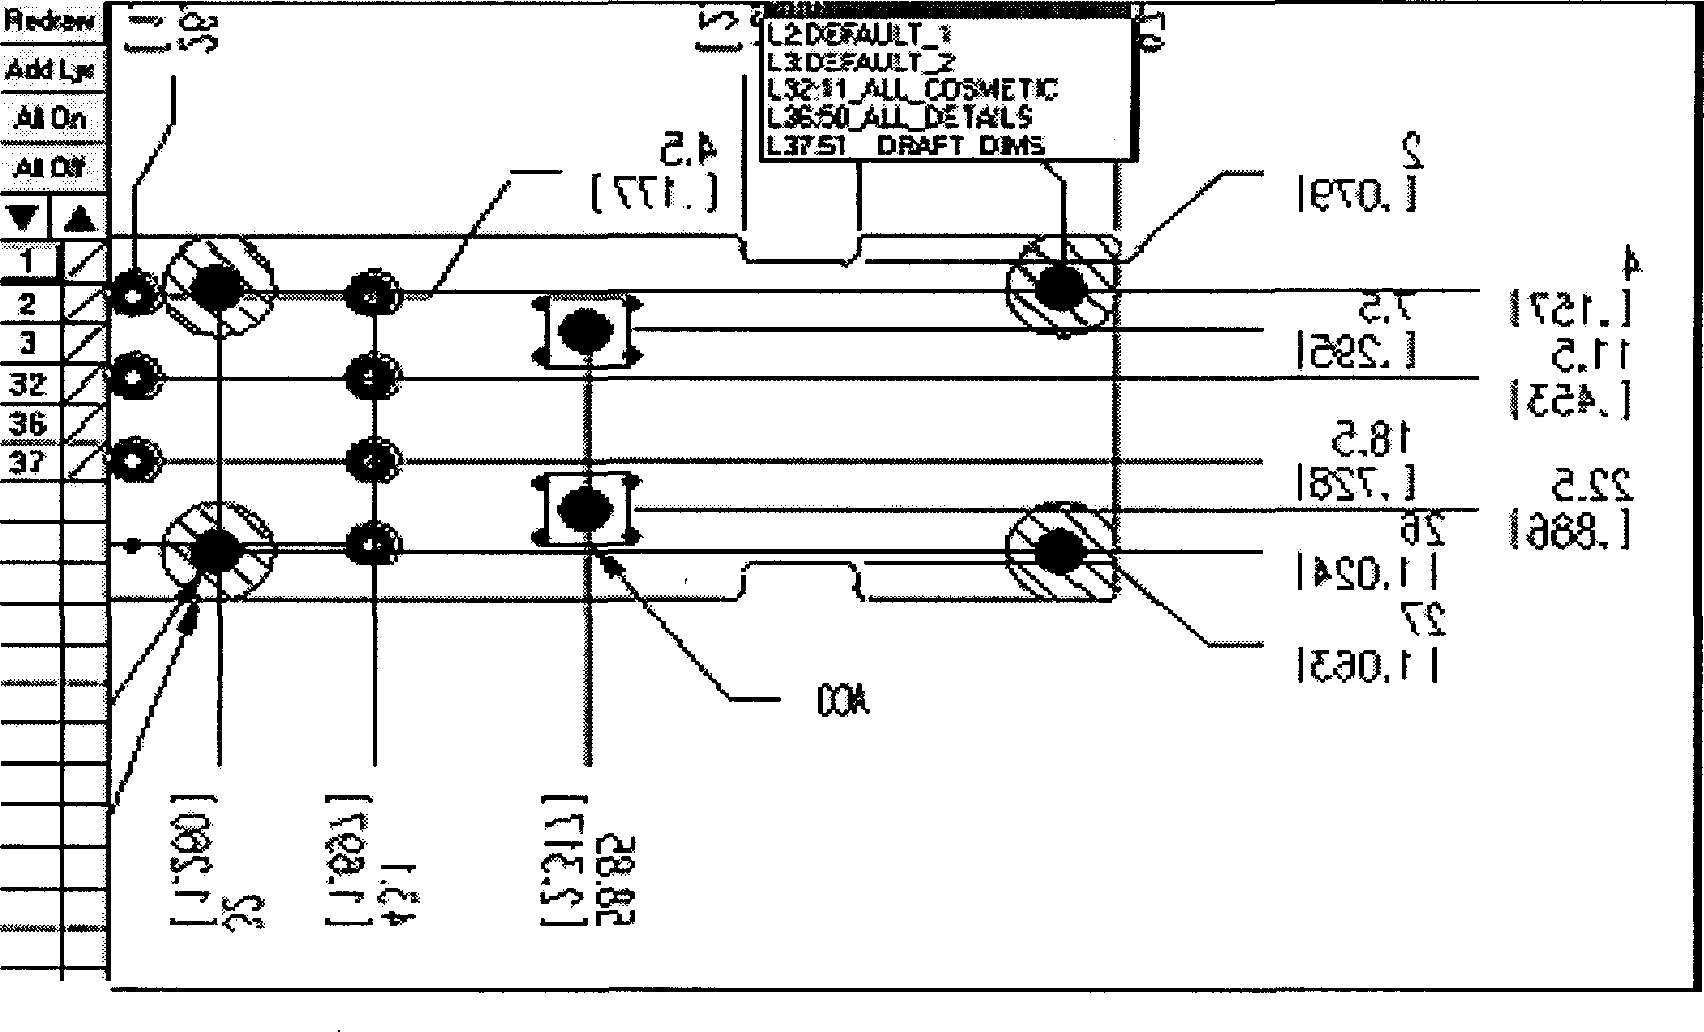 Method and apparatus for implementing PCB design